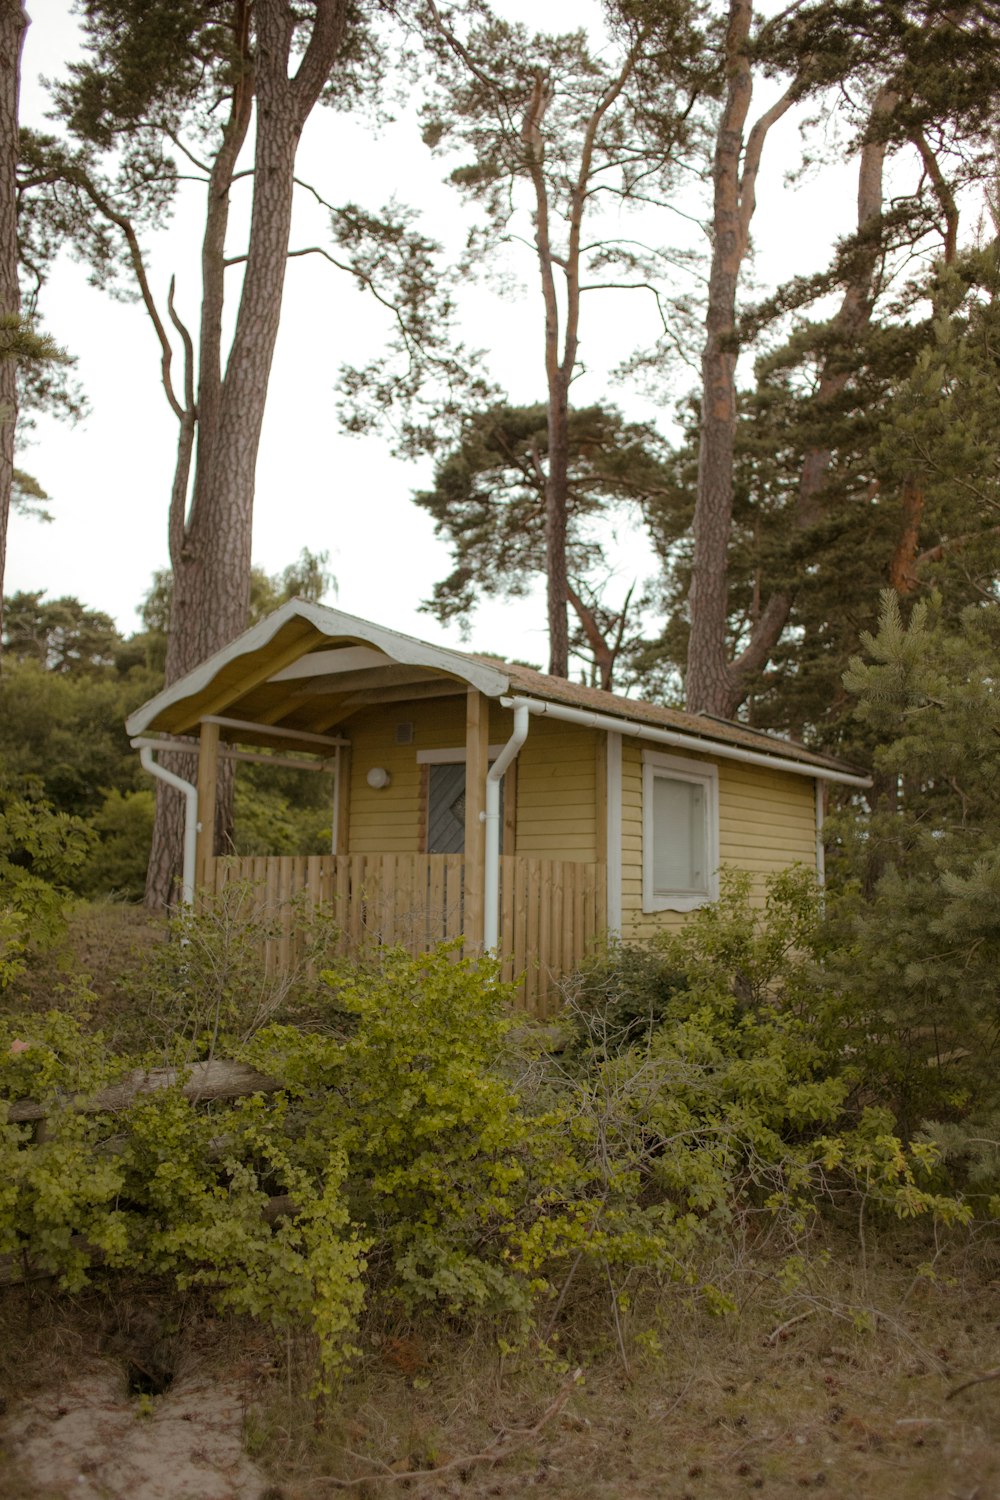 a small yellow house surrounded by trees